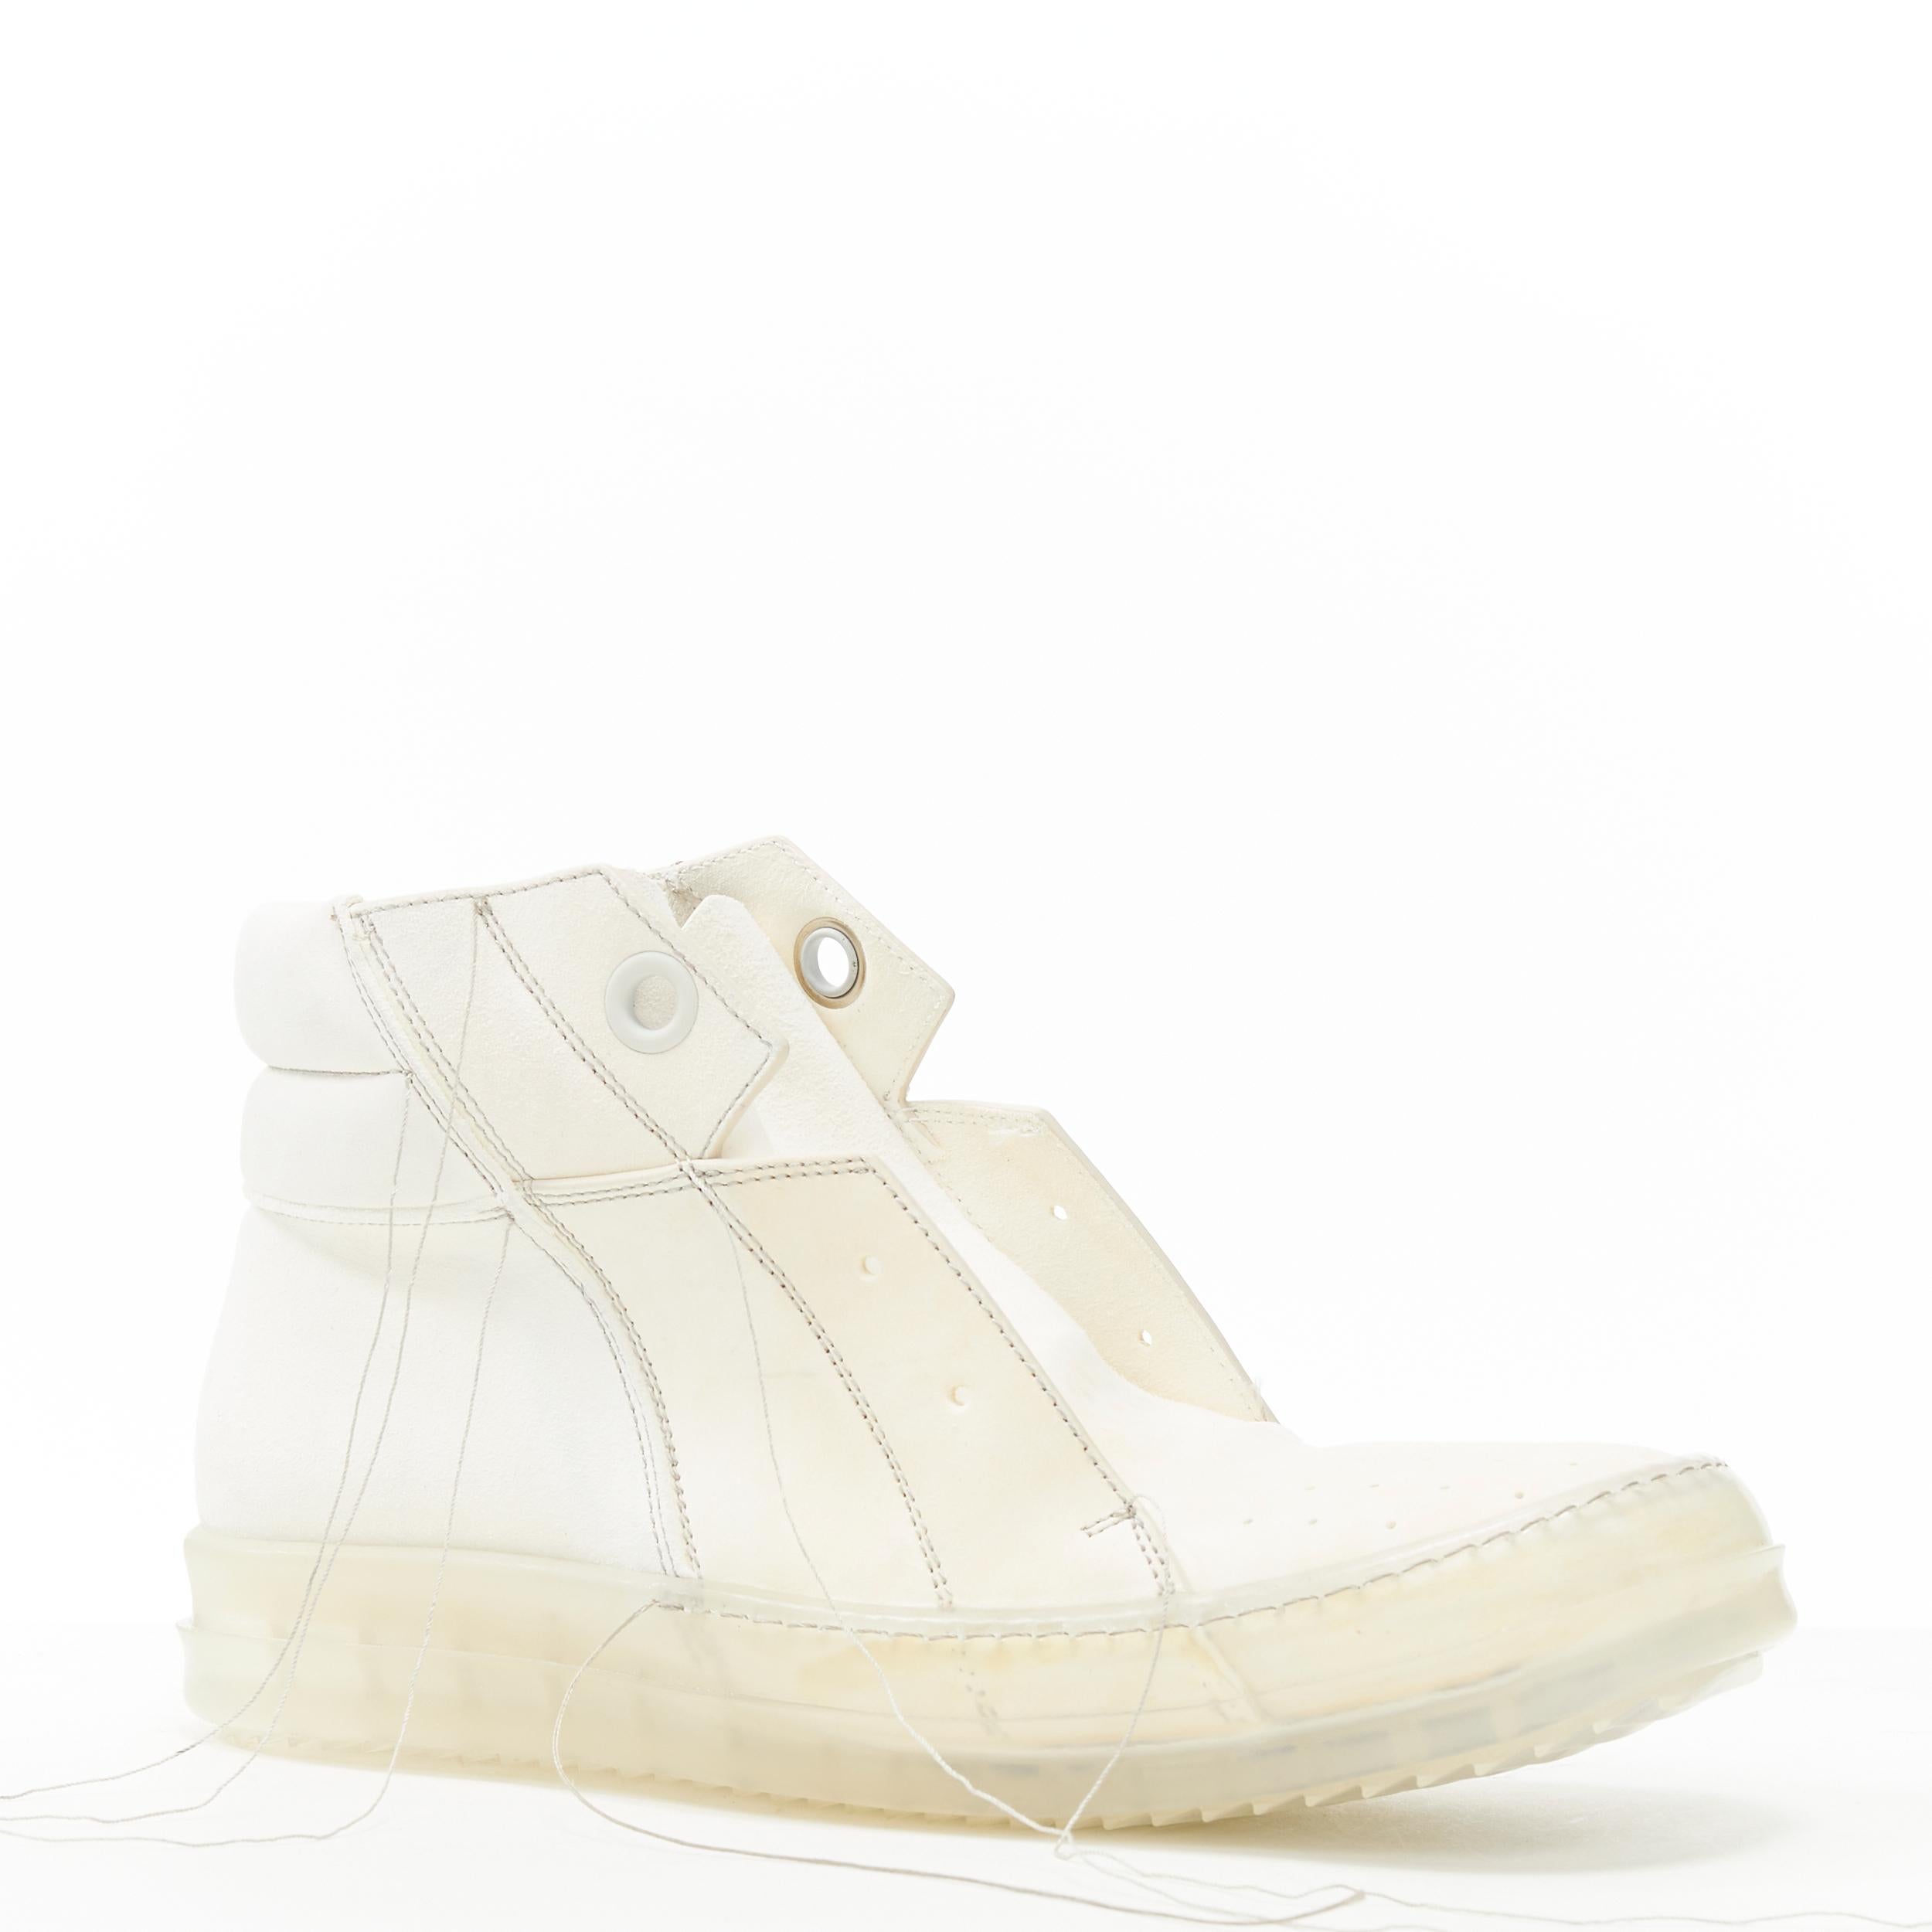 new RICK OWENS Island Dunk long thread distressed milk clear sole high dunk EU37 
Reference: TGAS/B01171 
Brand: Rick Owens 
Designer: Rick Owens 
Model: Island Dunk Milk 
Material: Leather 
Color: White 
Pattern: Solid 
Closure: Lace Up 
Extra